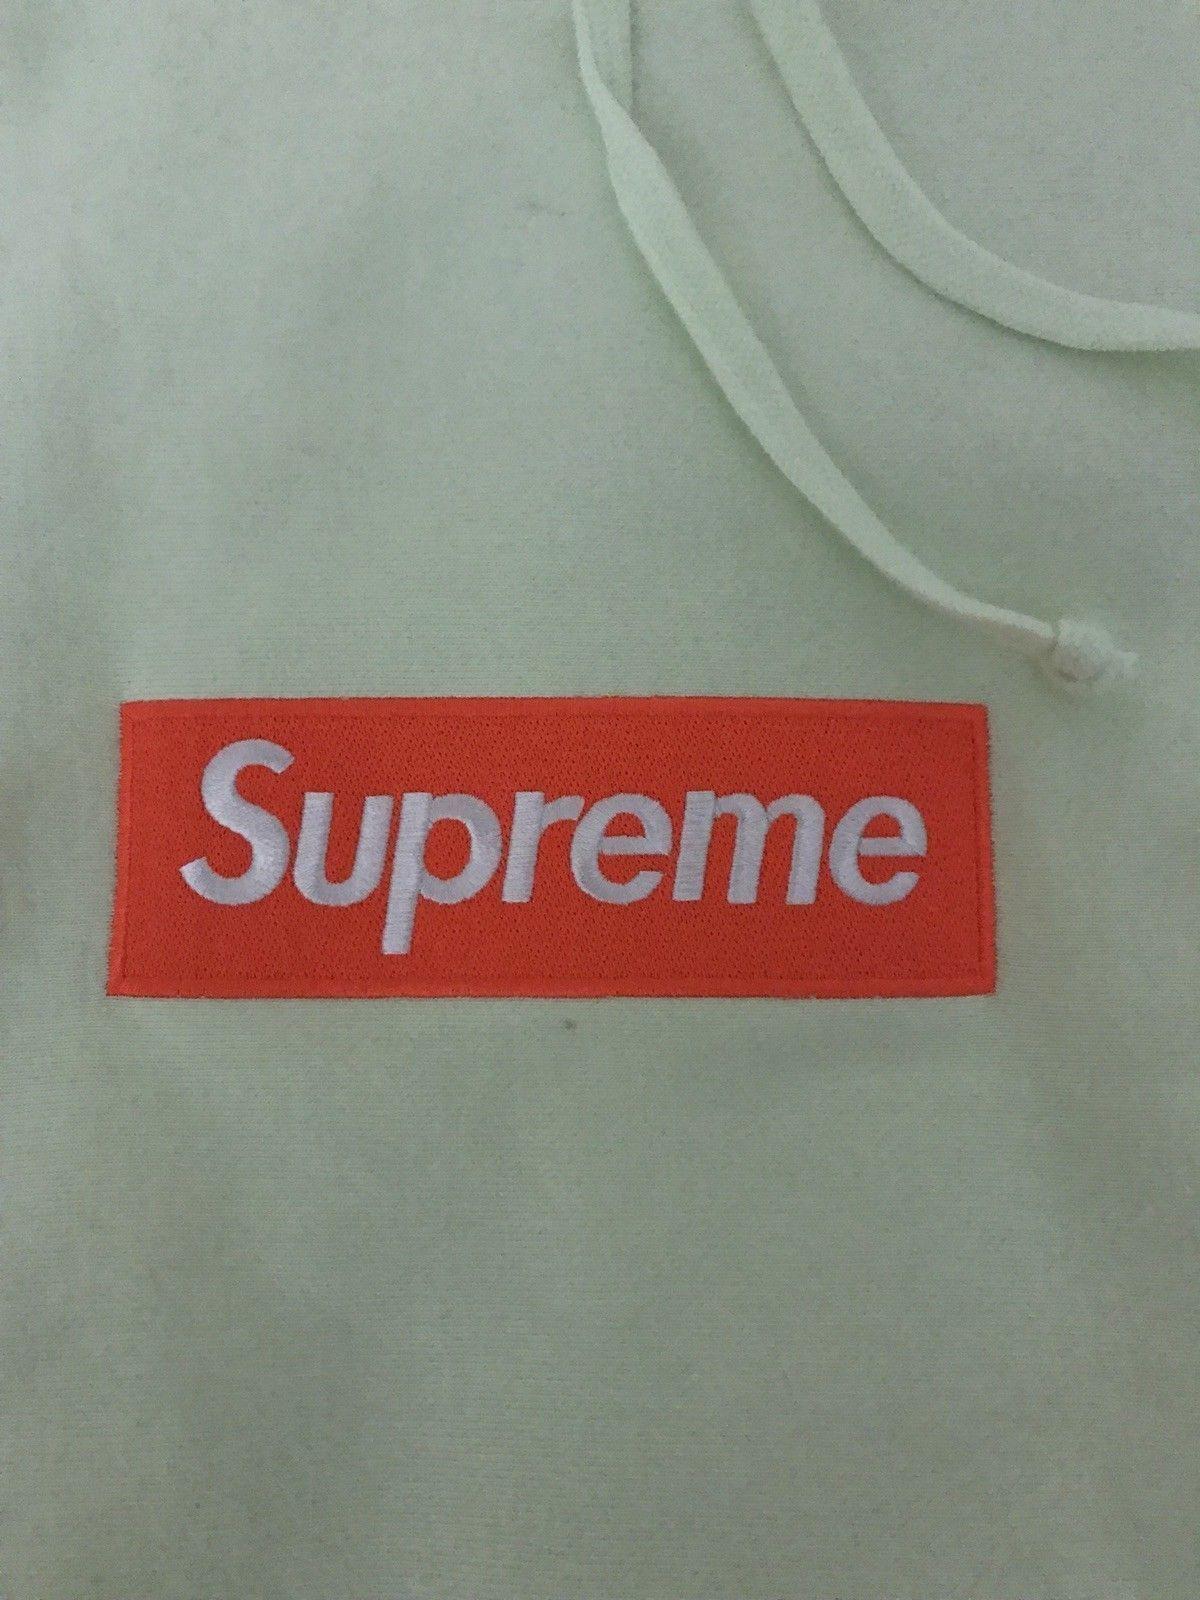 Green Supreme Hoodie Box Logo - Details about FW17 Pale Lime Green Supreme Box Logo Hoodie ...